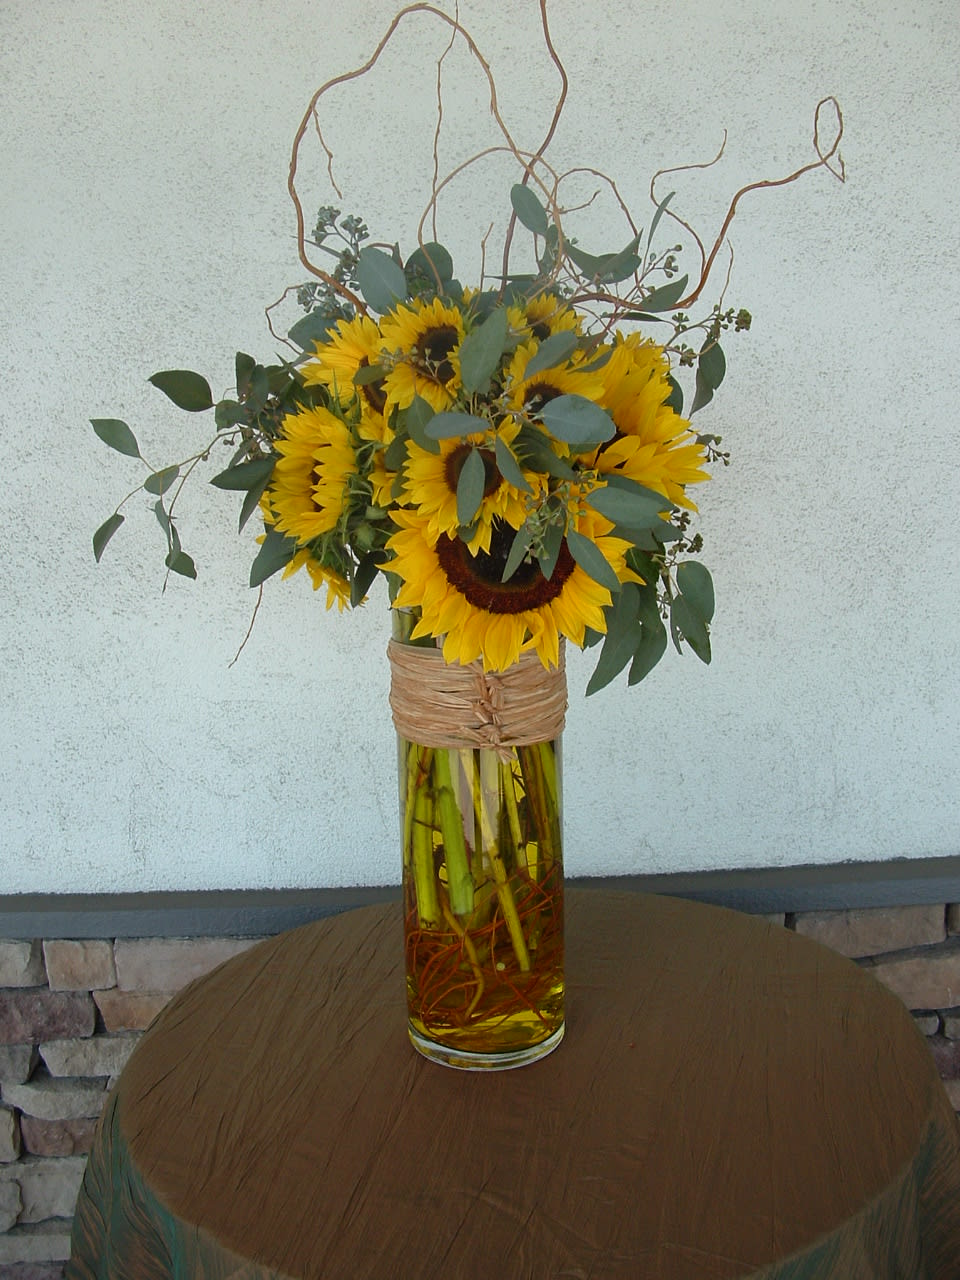 Sunflower for me  - Tall Cylinder Vase with sunflowers